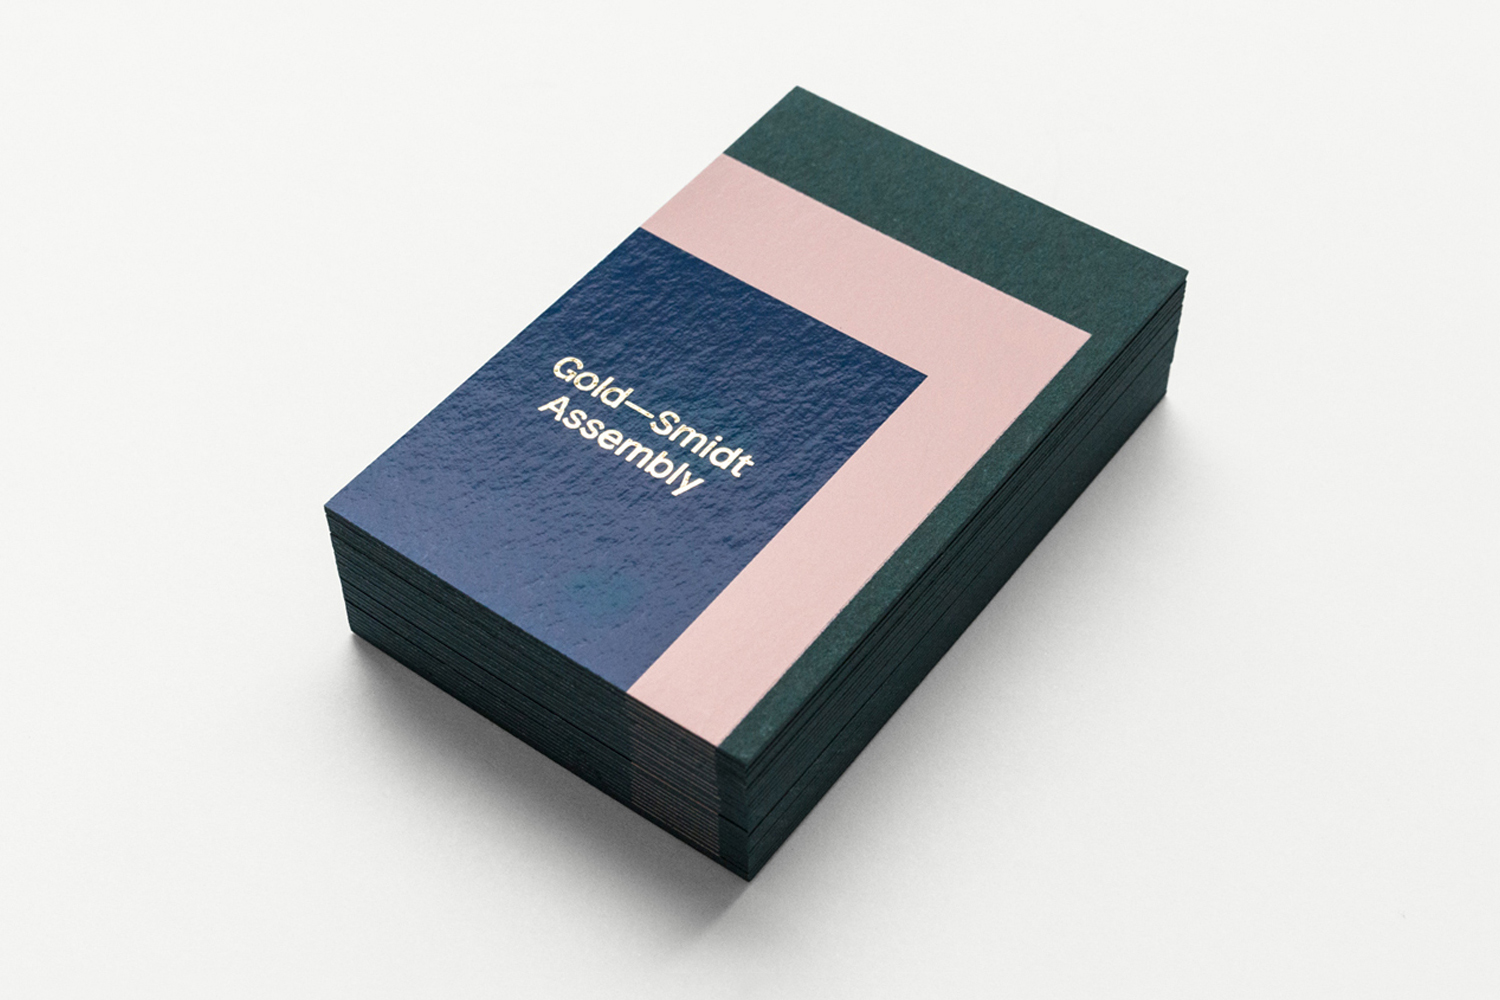 Brand identity, print and signage by Copenhagen design studio Republic for pop-up art gallery Gold—Smidt Assembly